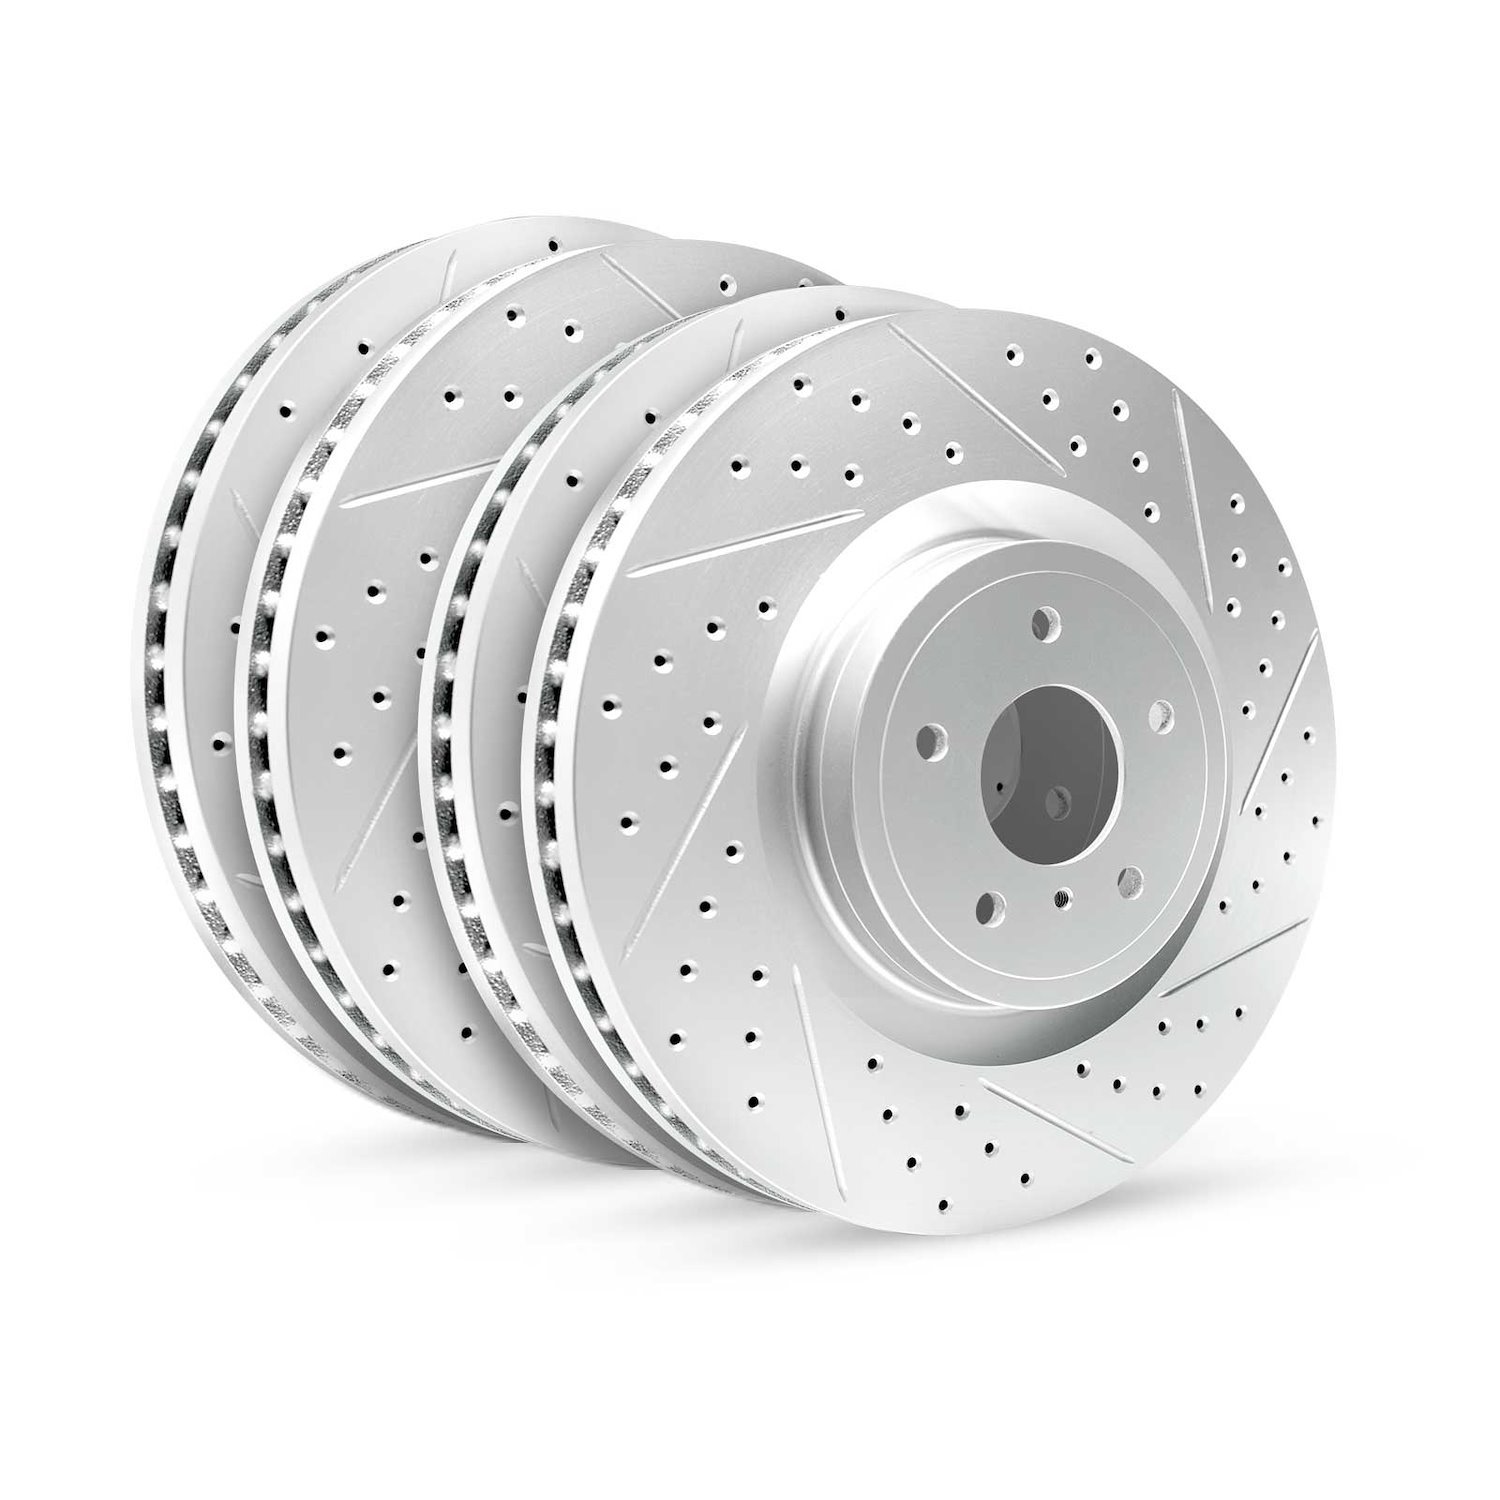 GEO-Carbon Drilled/Slotted Rotors, 1999-2019 Ford/Mazda, Position: Front/Rear